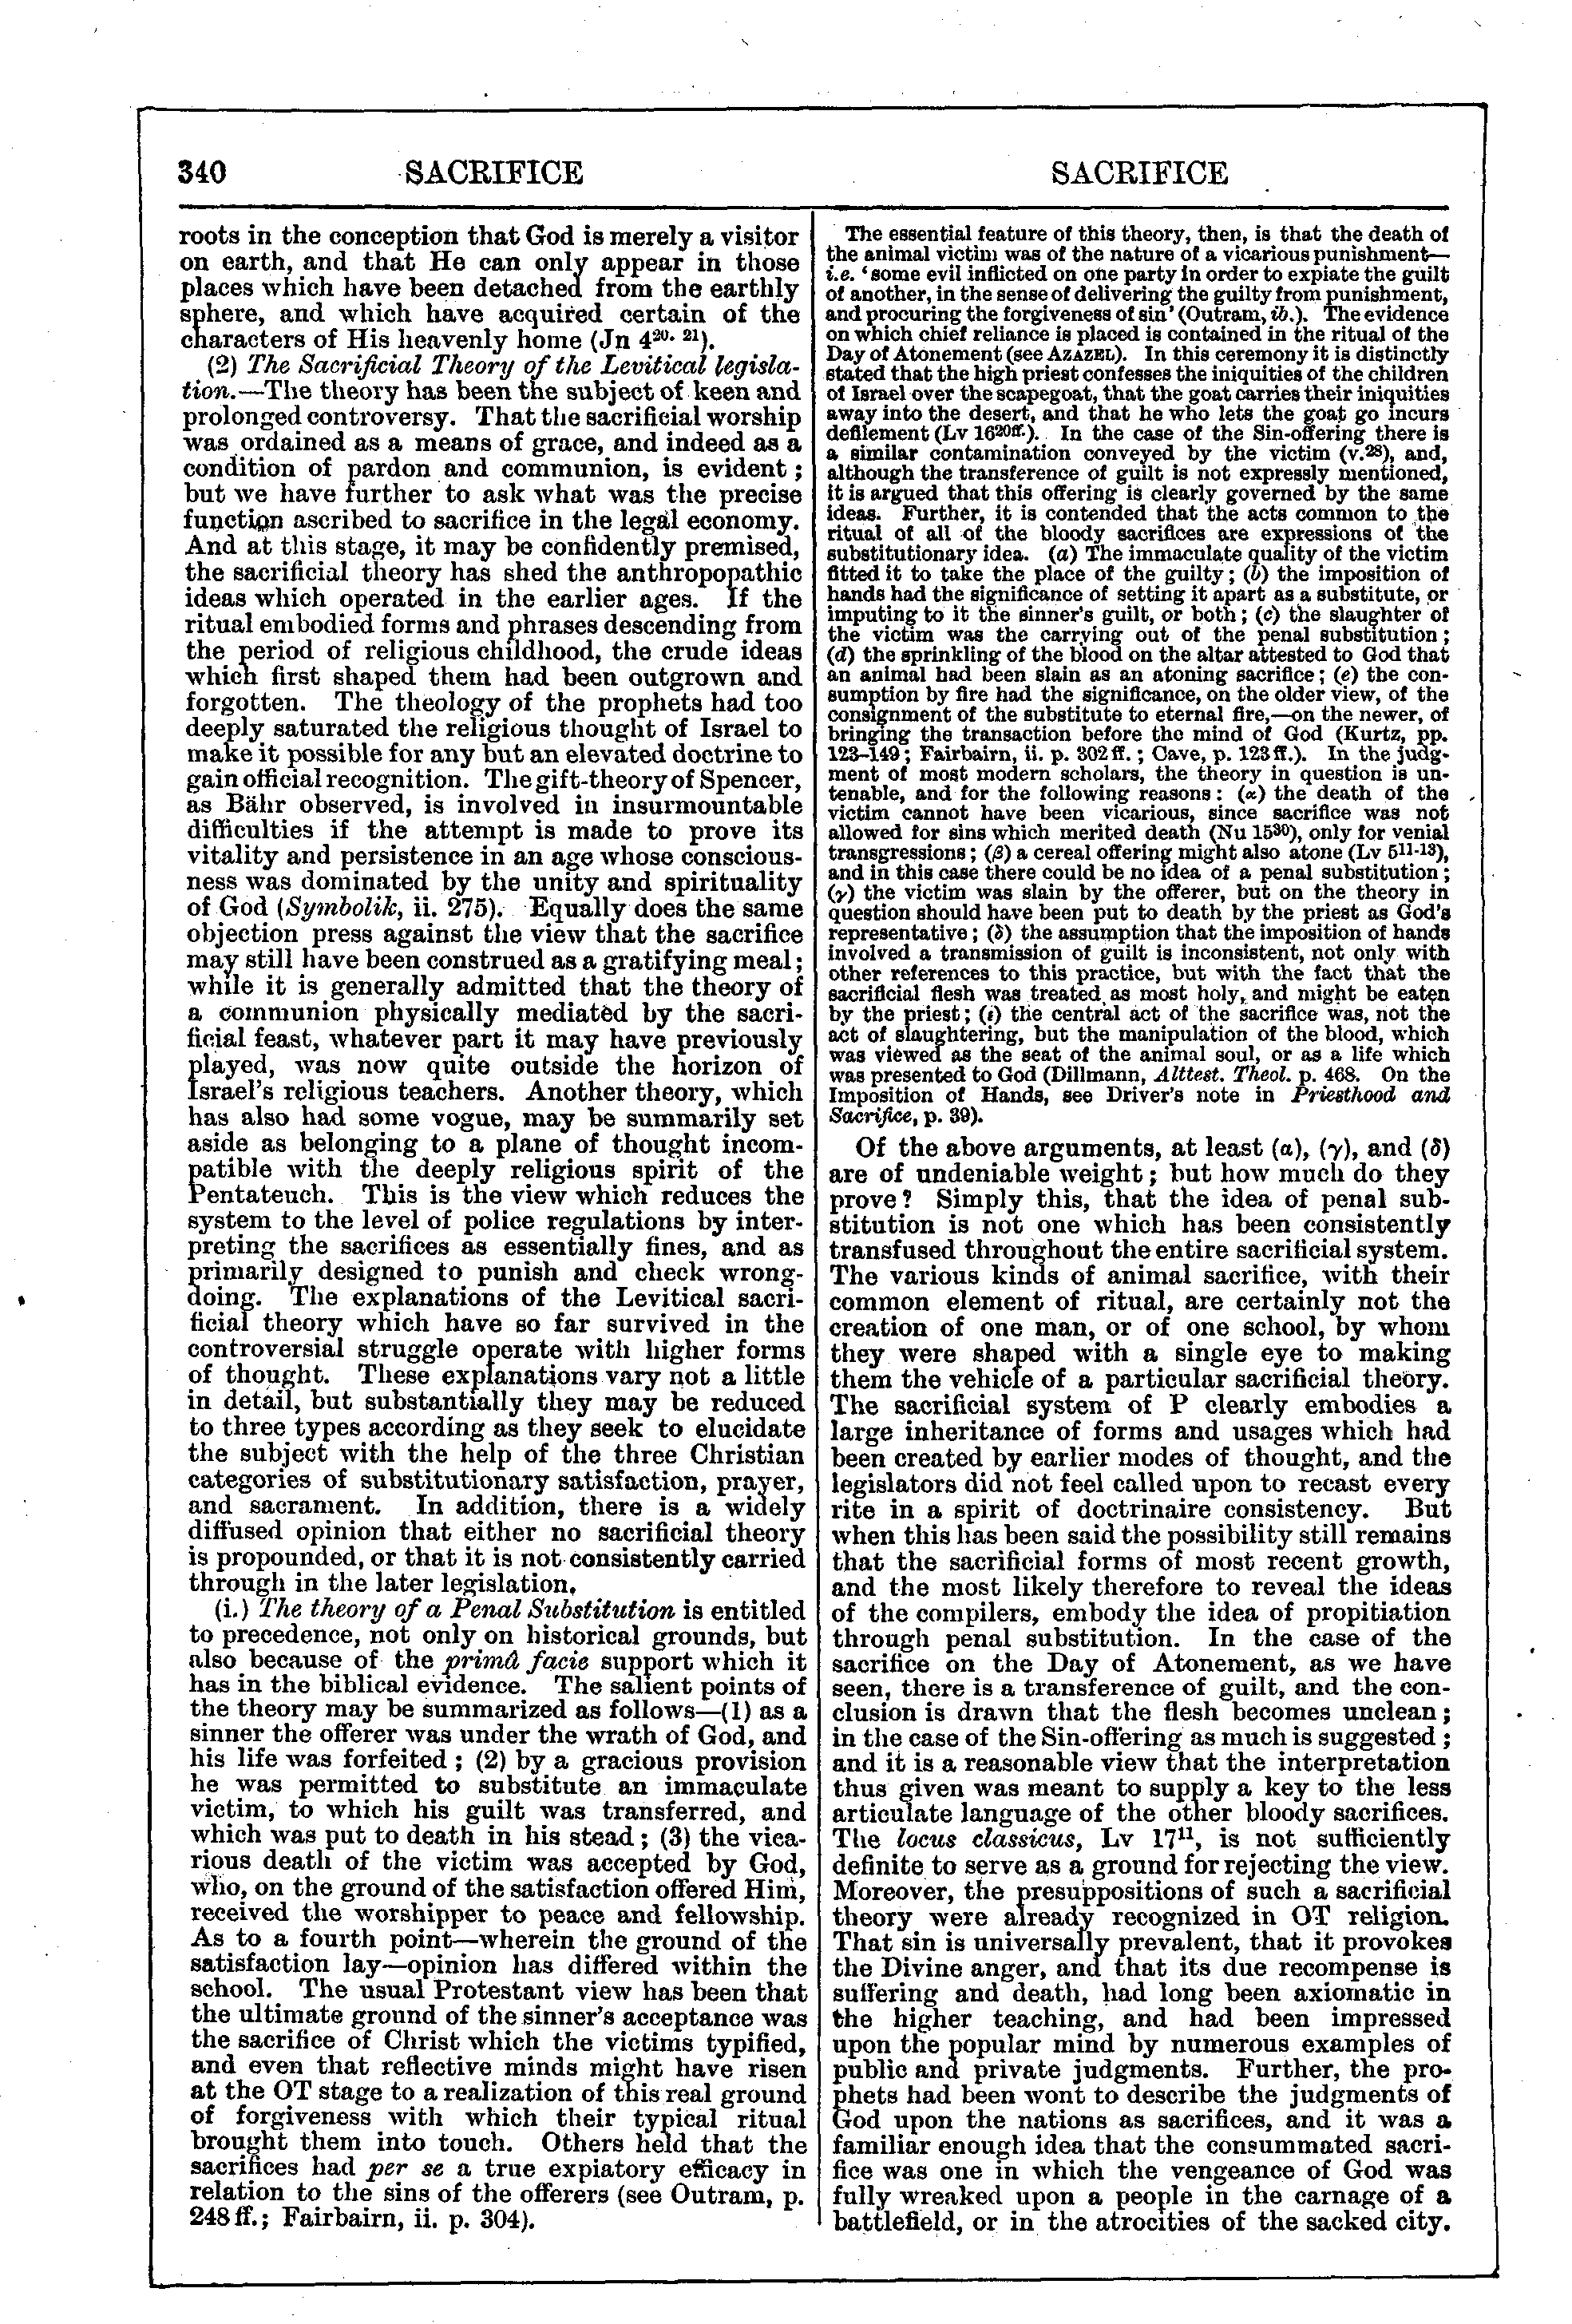 Image of page 340